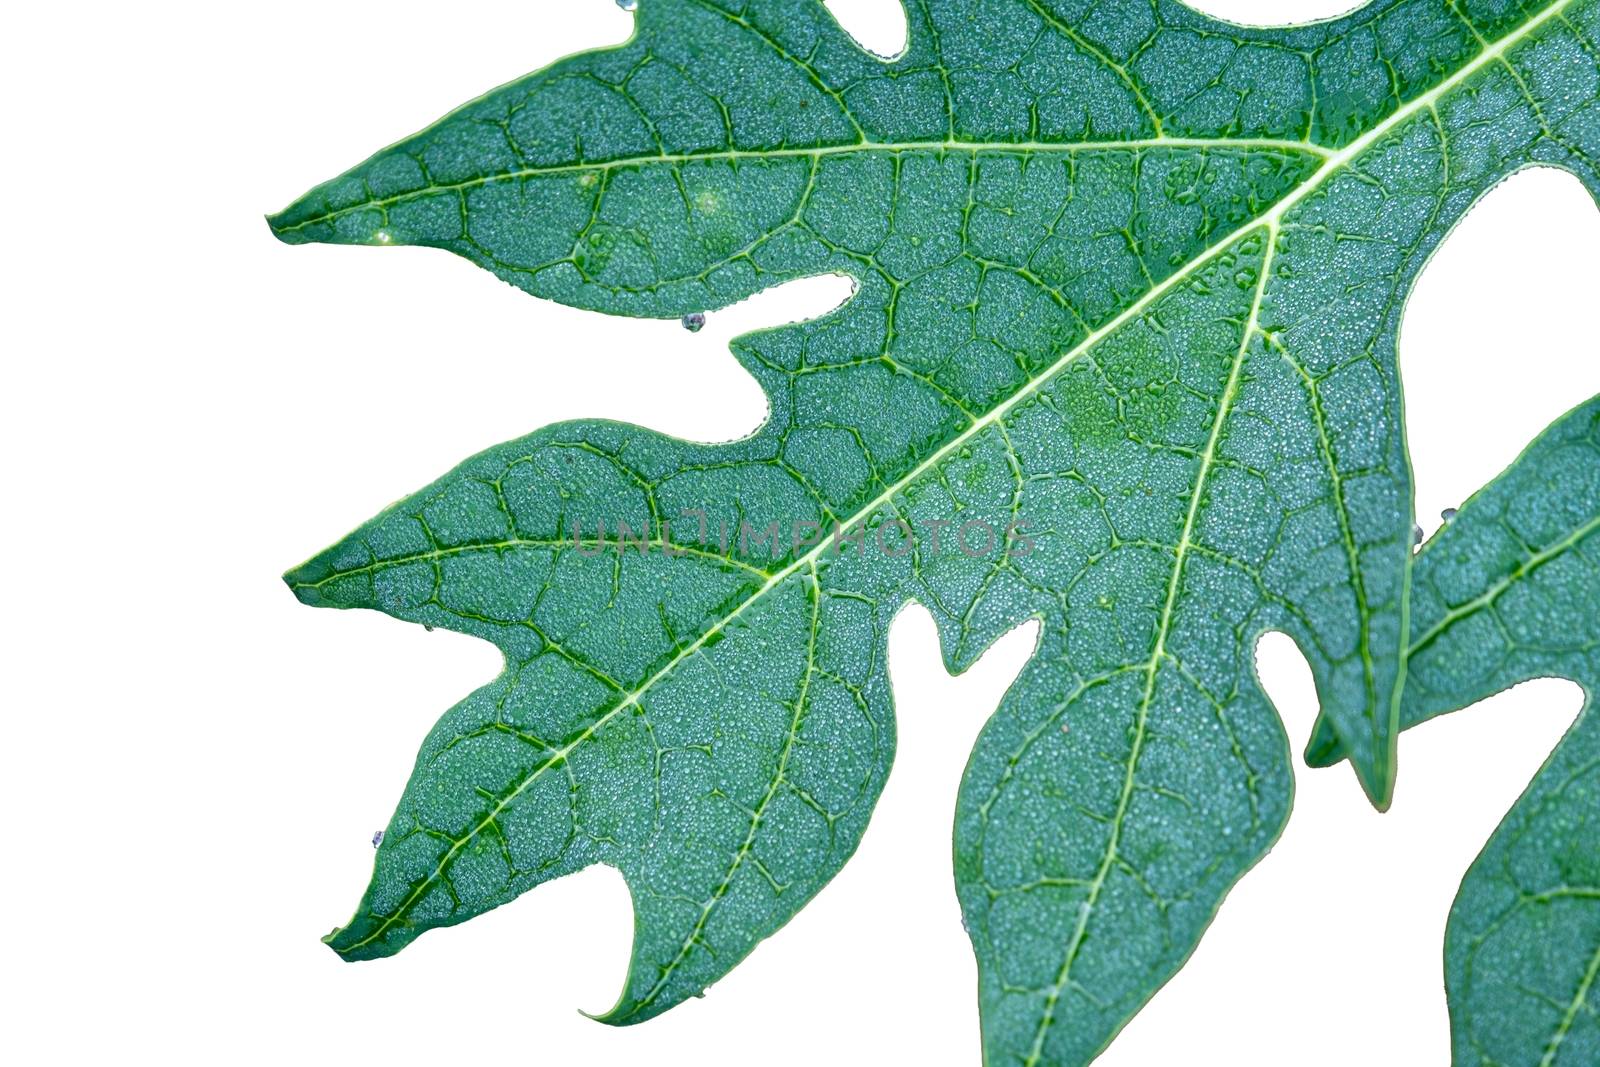 The Rain drop on papaya leaf show pattern With shadow edge, select focus, isolate white background